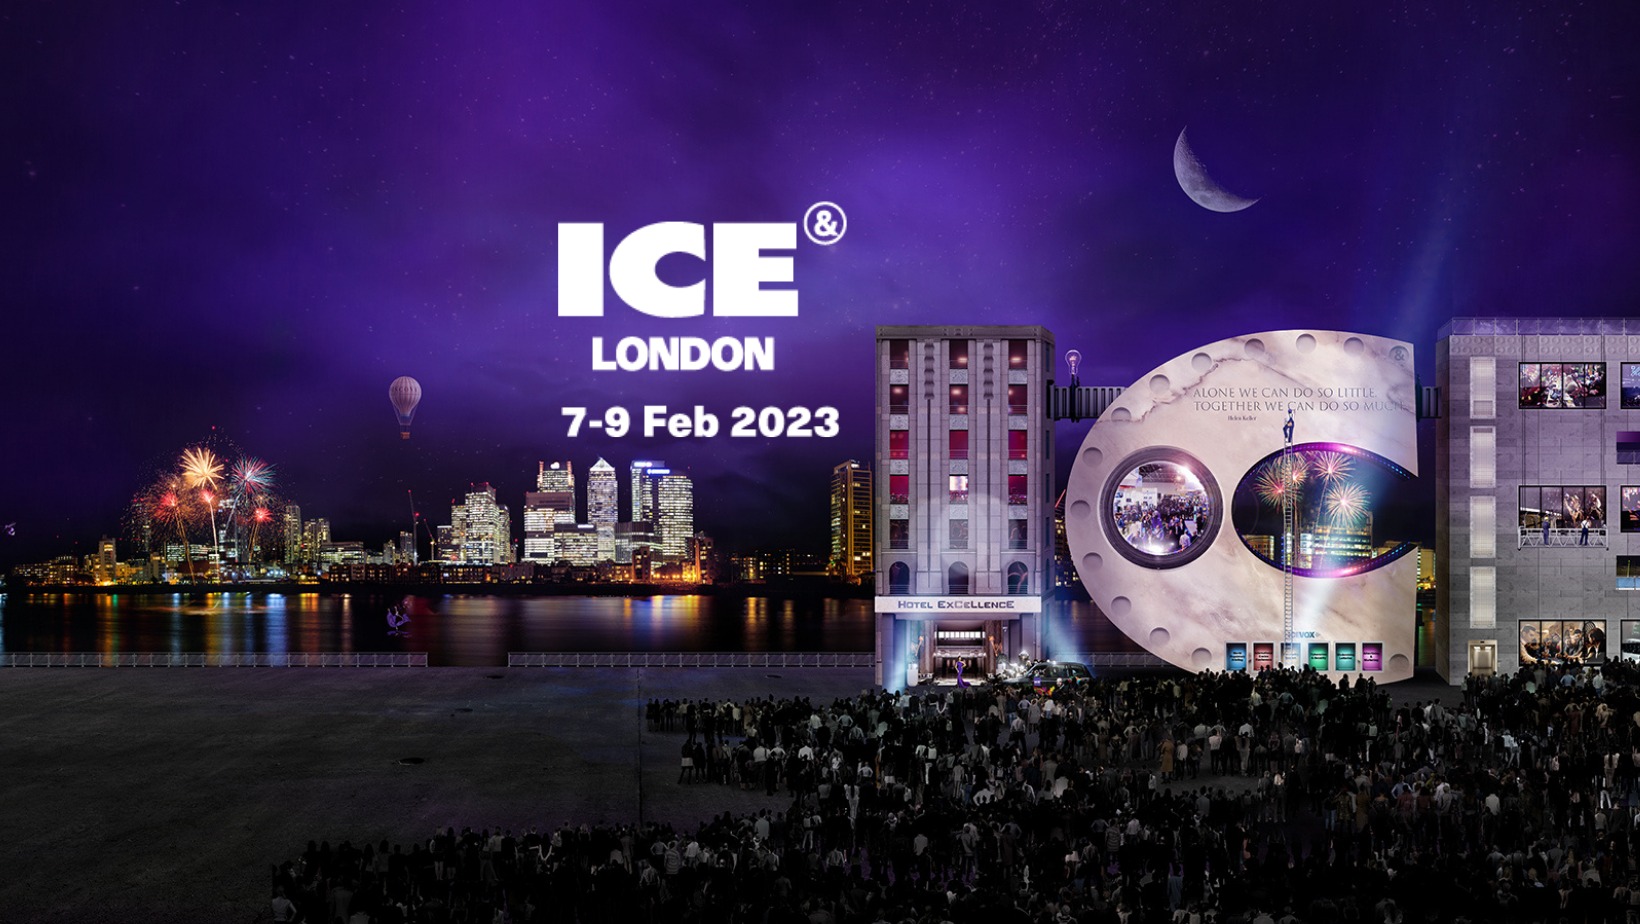 Skilrock Technologies is heading to ICE London 2023 iGaming Express